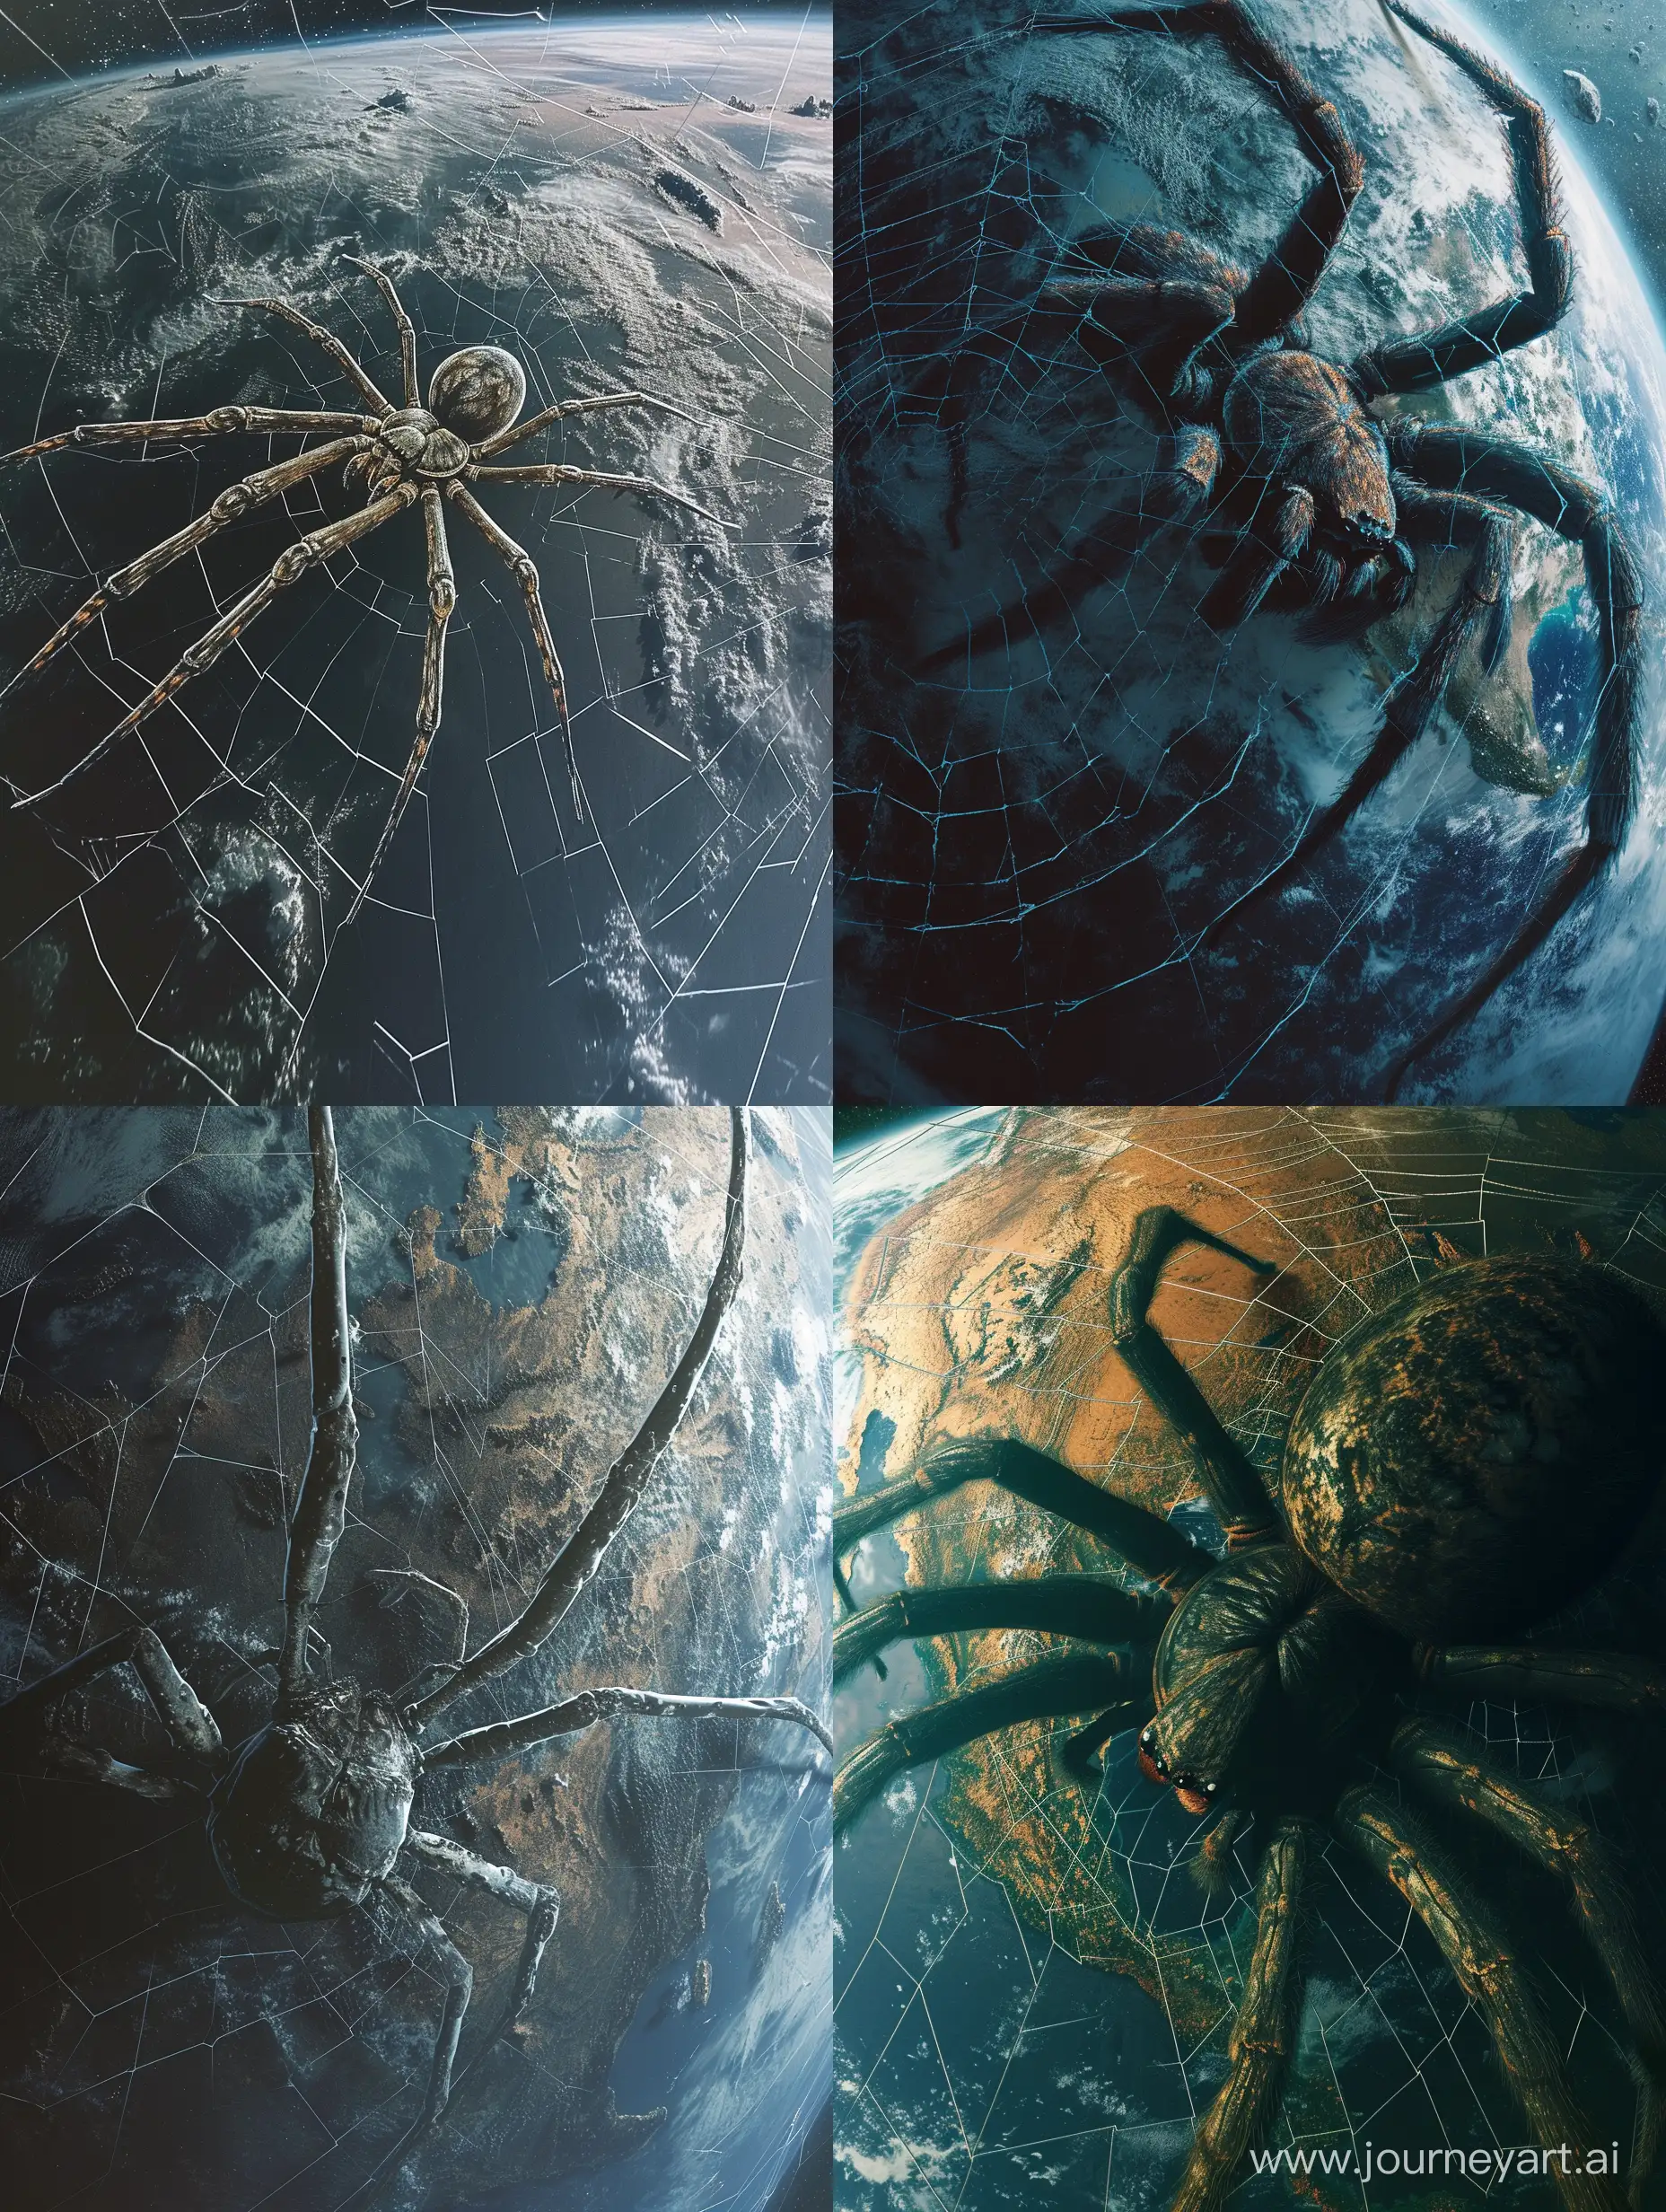 color photo of a satellite view from space, capturing a massive spider crawling across the surface of planet Earth. The spider's immense size is accentuated by the vastness of the planet, creating a surreal and awe-inspiring sight. Its long, sinewy legs stretch out, wrapping Earth in a web of intricate patterns that crisscross continents and oceans. The eerie lighting casts deep shadows, enhancing the sinister and foreboding atmosphere. The image portrays a sense of abandonment, as if humanity has vanished, leaving only the spider and its web behind. Experimenting with color grading techniques, such as desaturating the image or adding cool tones, can intensify the unsettling feeling and emphasize the otherworldly presence of the spider.